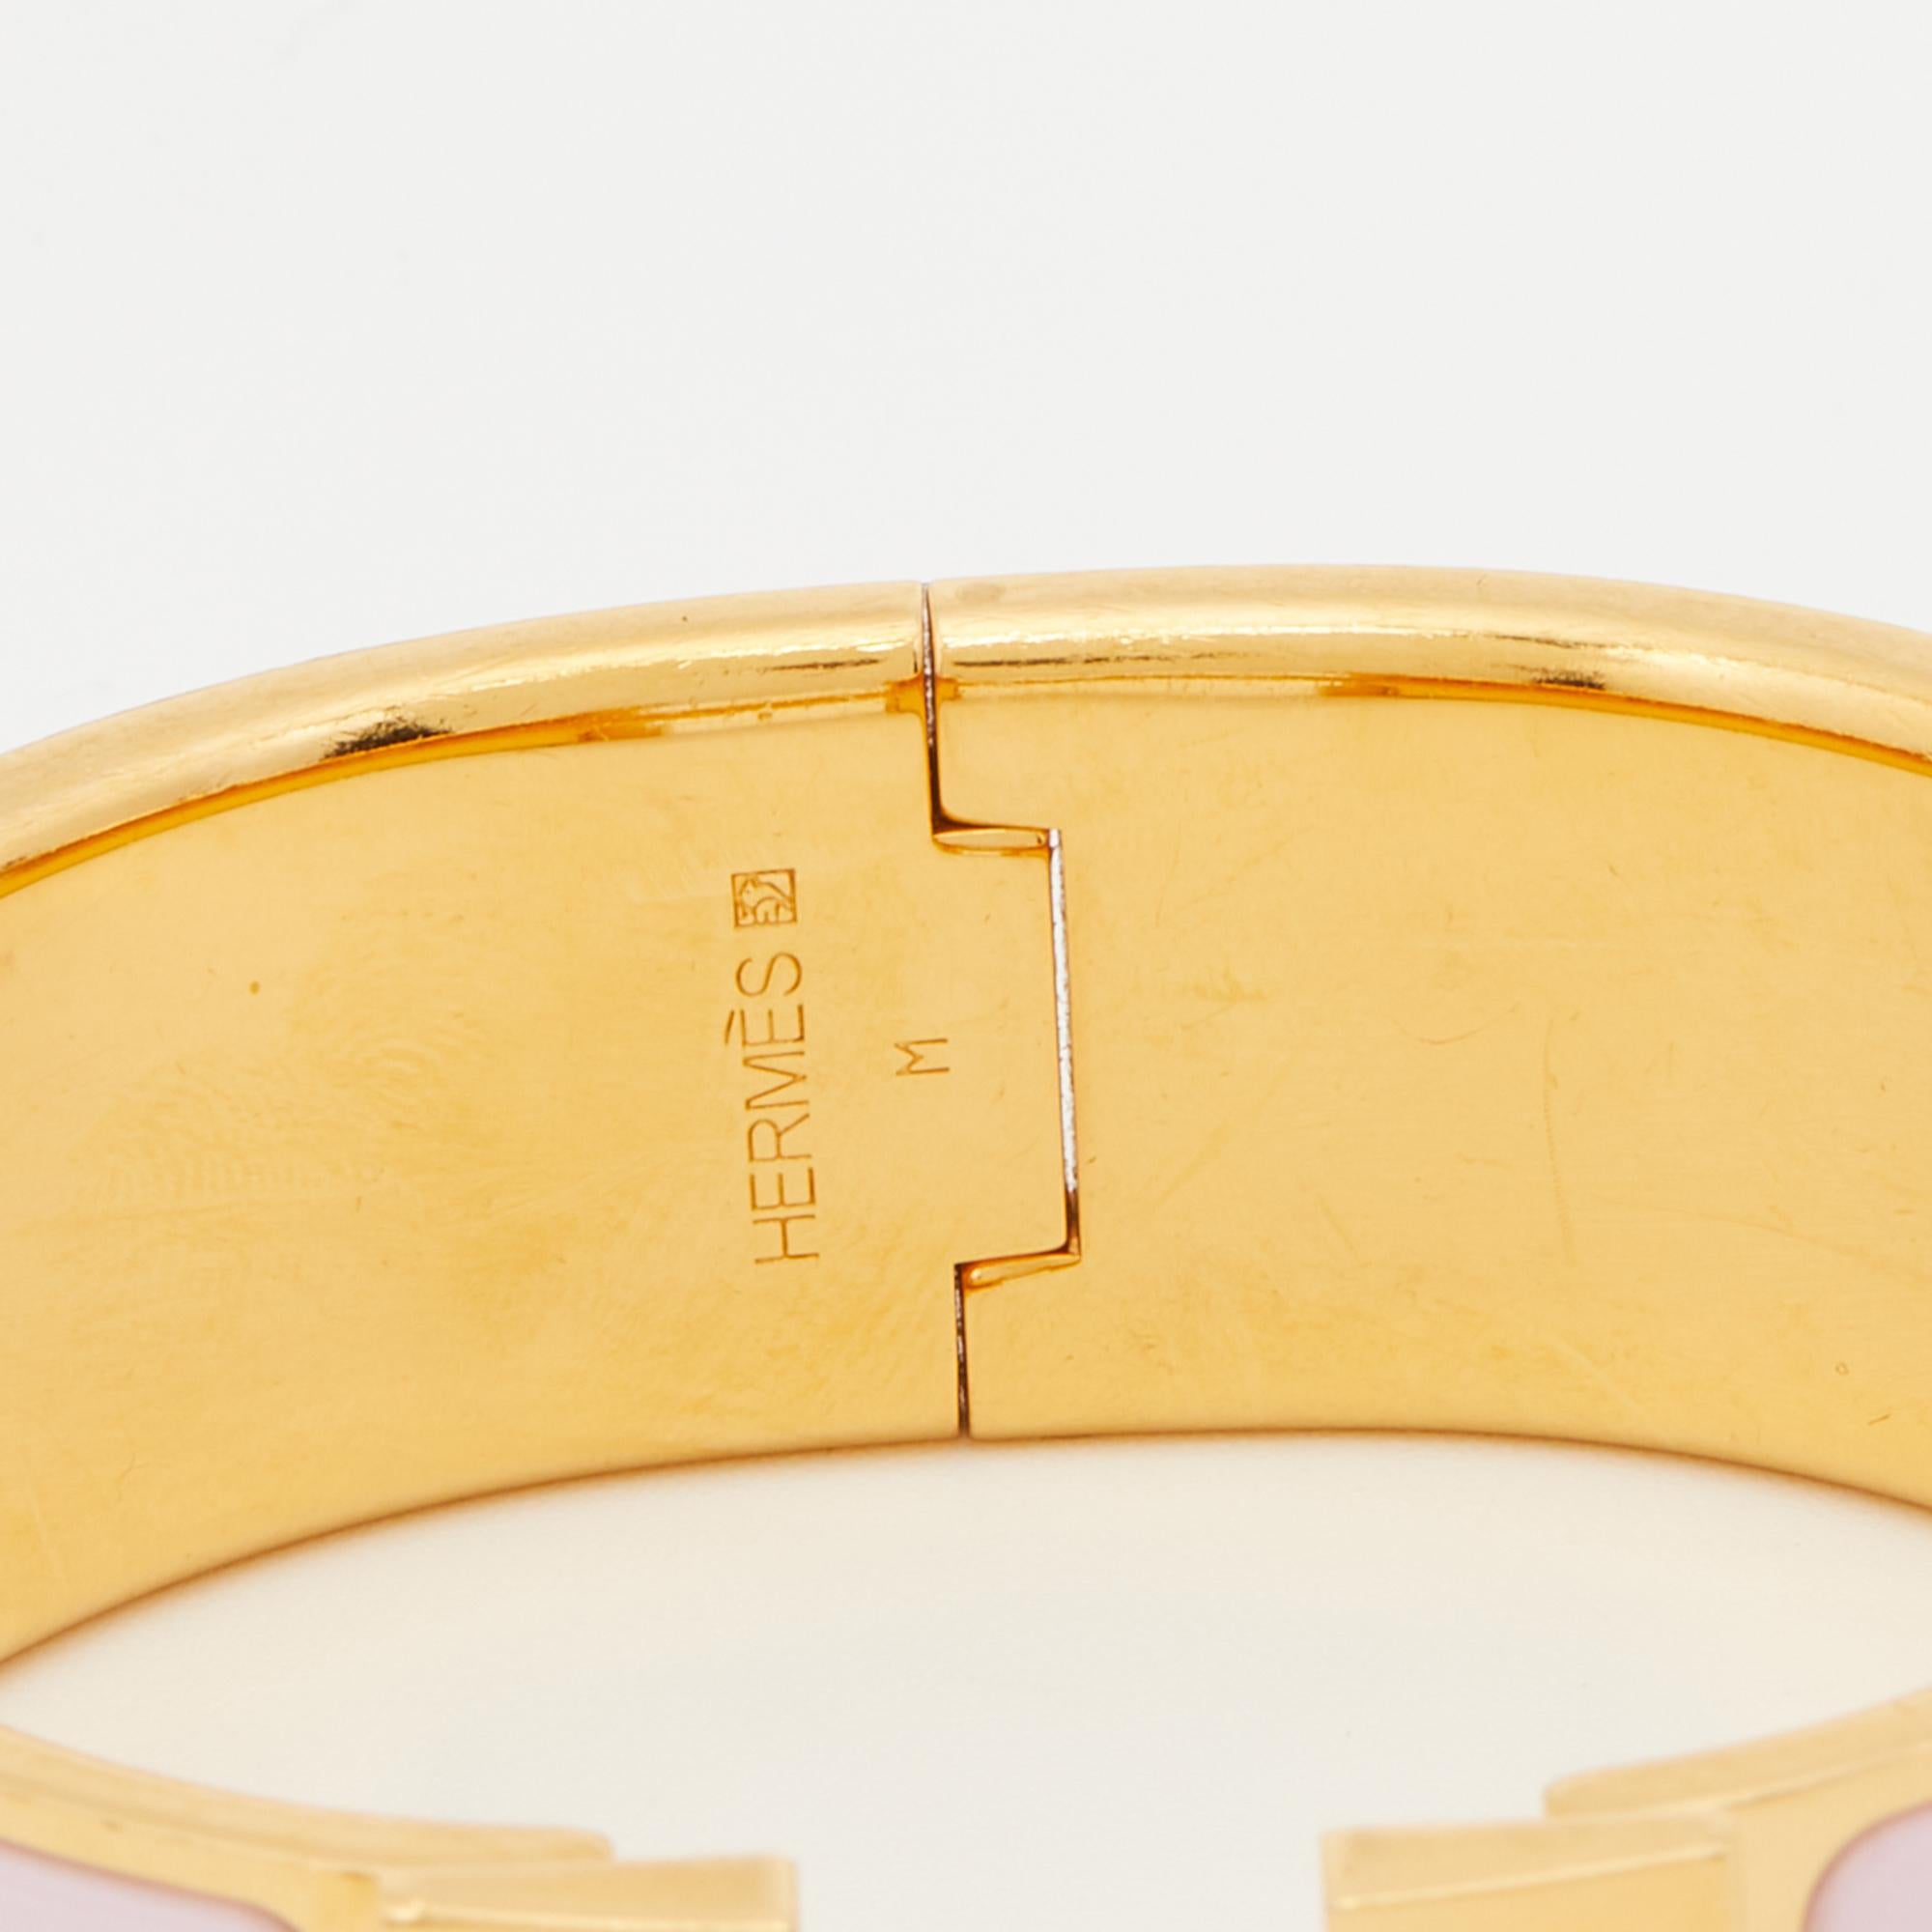 Let your jewelry speak for you with this Hermes Clic Clac H bracelet. It’s just perfect for those beach summer days! This bracelet is made with gold-plated metal, and the cherry on top is the signature Hermes ‘H’ logo on the front. It will